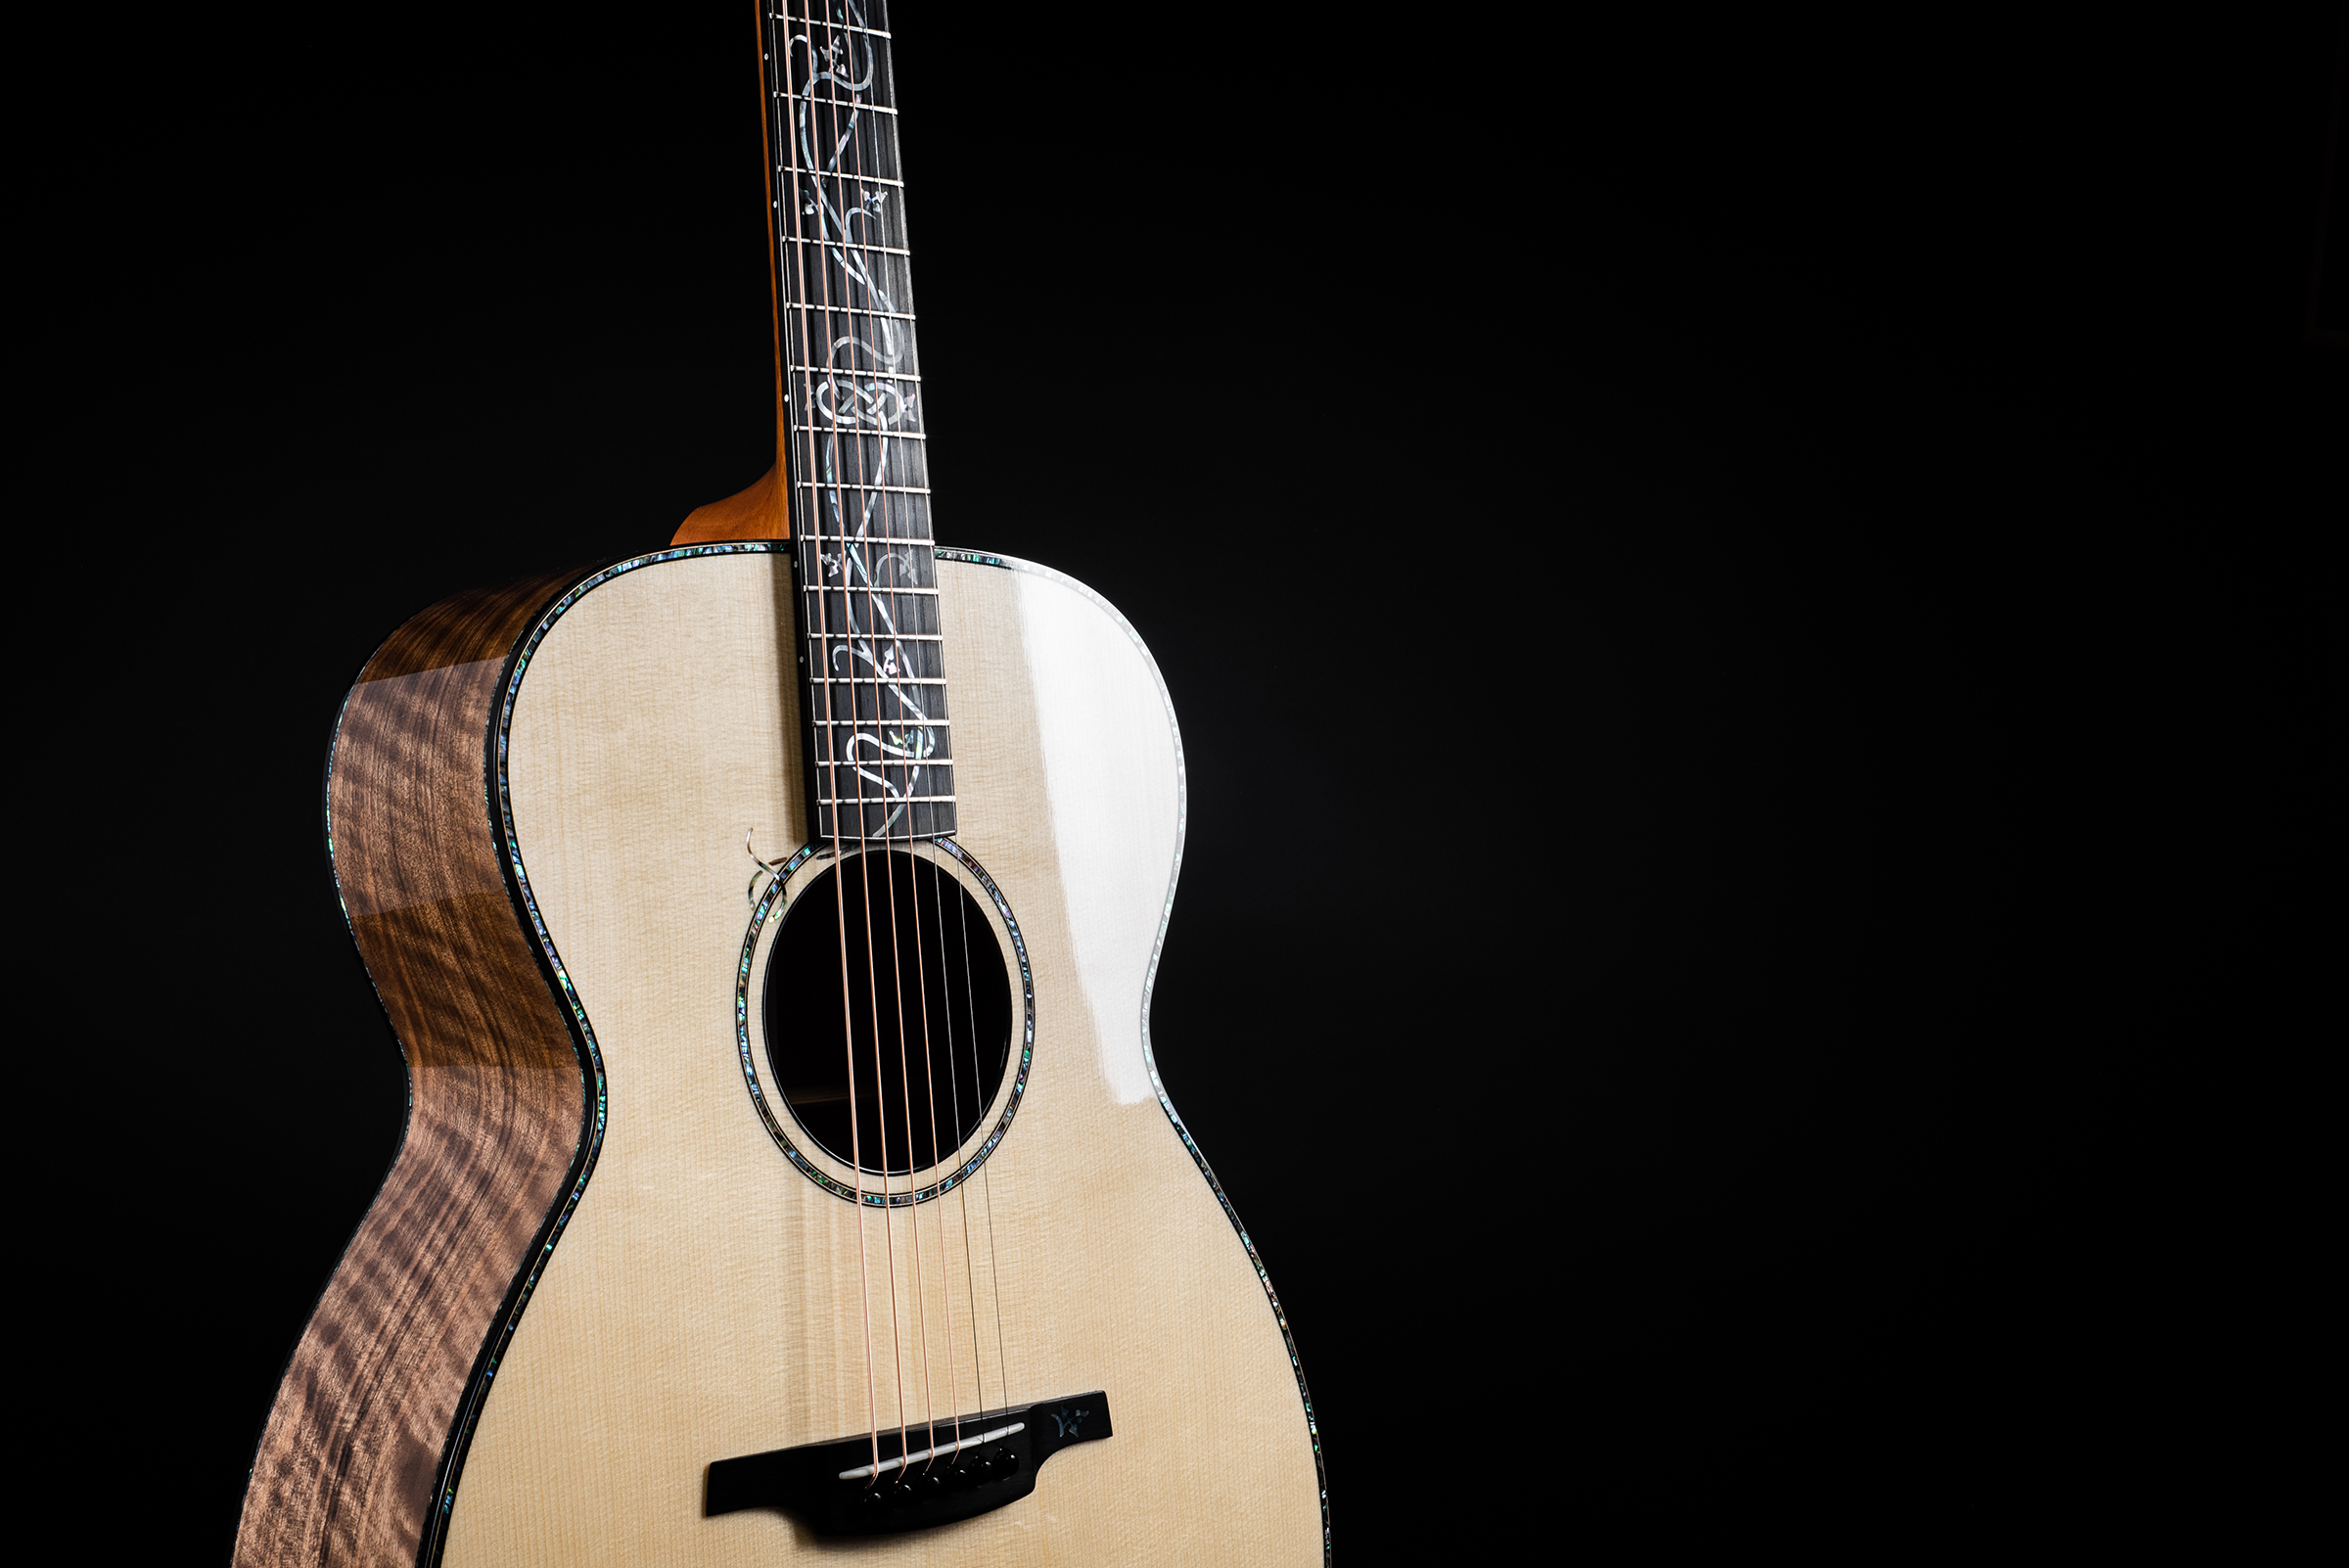 N.Ireland guitar maker is raffling an ACOUSTIC GUITAR worth £6000 to raise money for struggling musicians during pandemic 